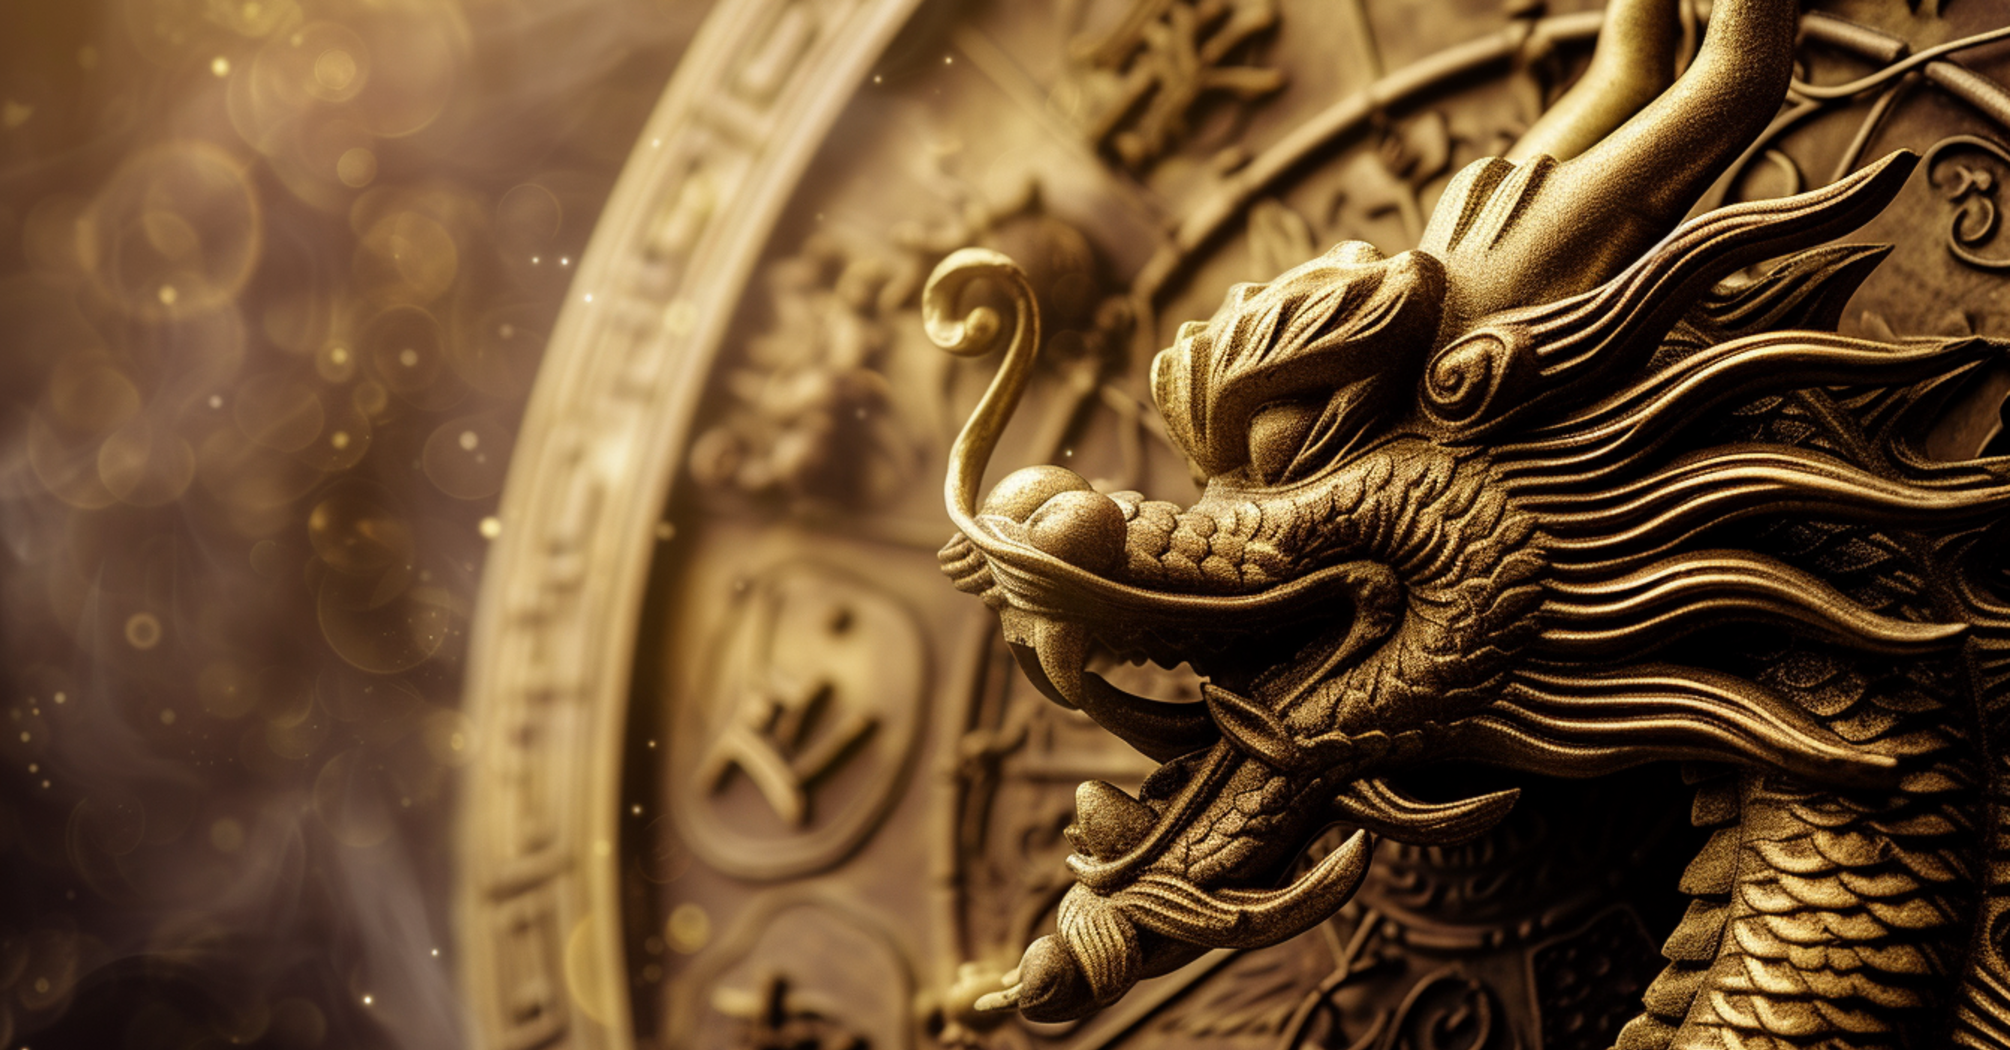 Focus on the details: Chinese horoscope for February 29